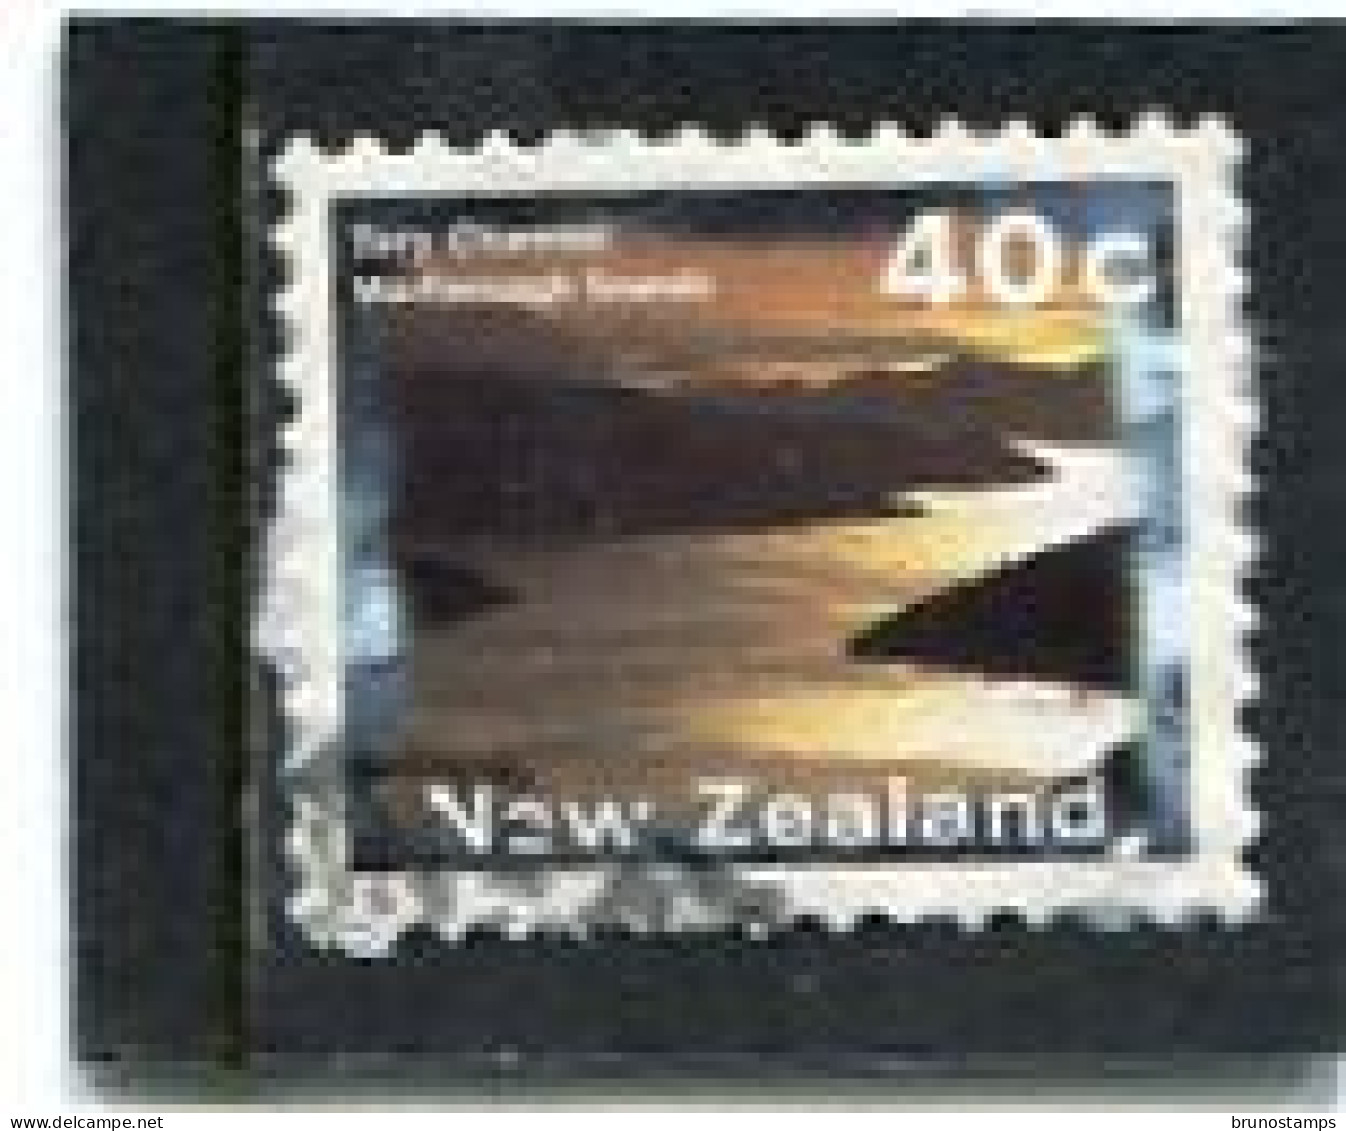 NEW ZEALAND - 2004  40c  TORY CHANNEL  SELF ADHESIVE  FINE  USED - Oblitérés